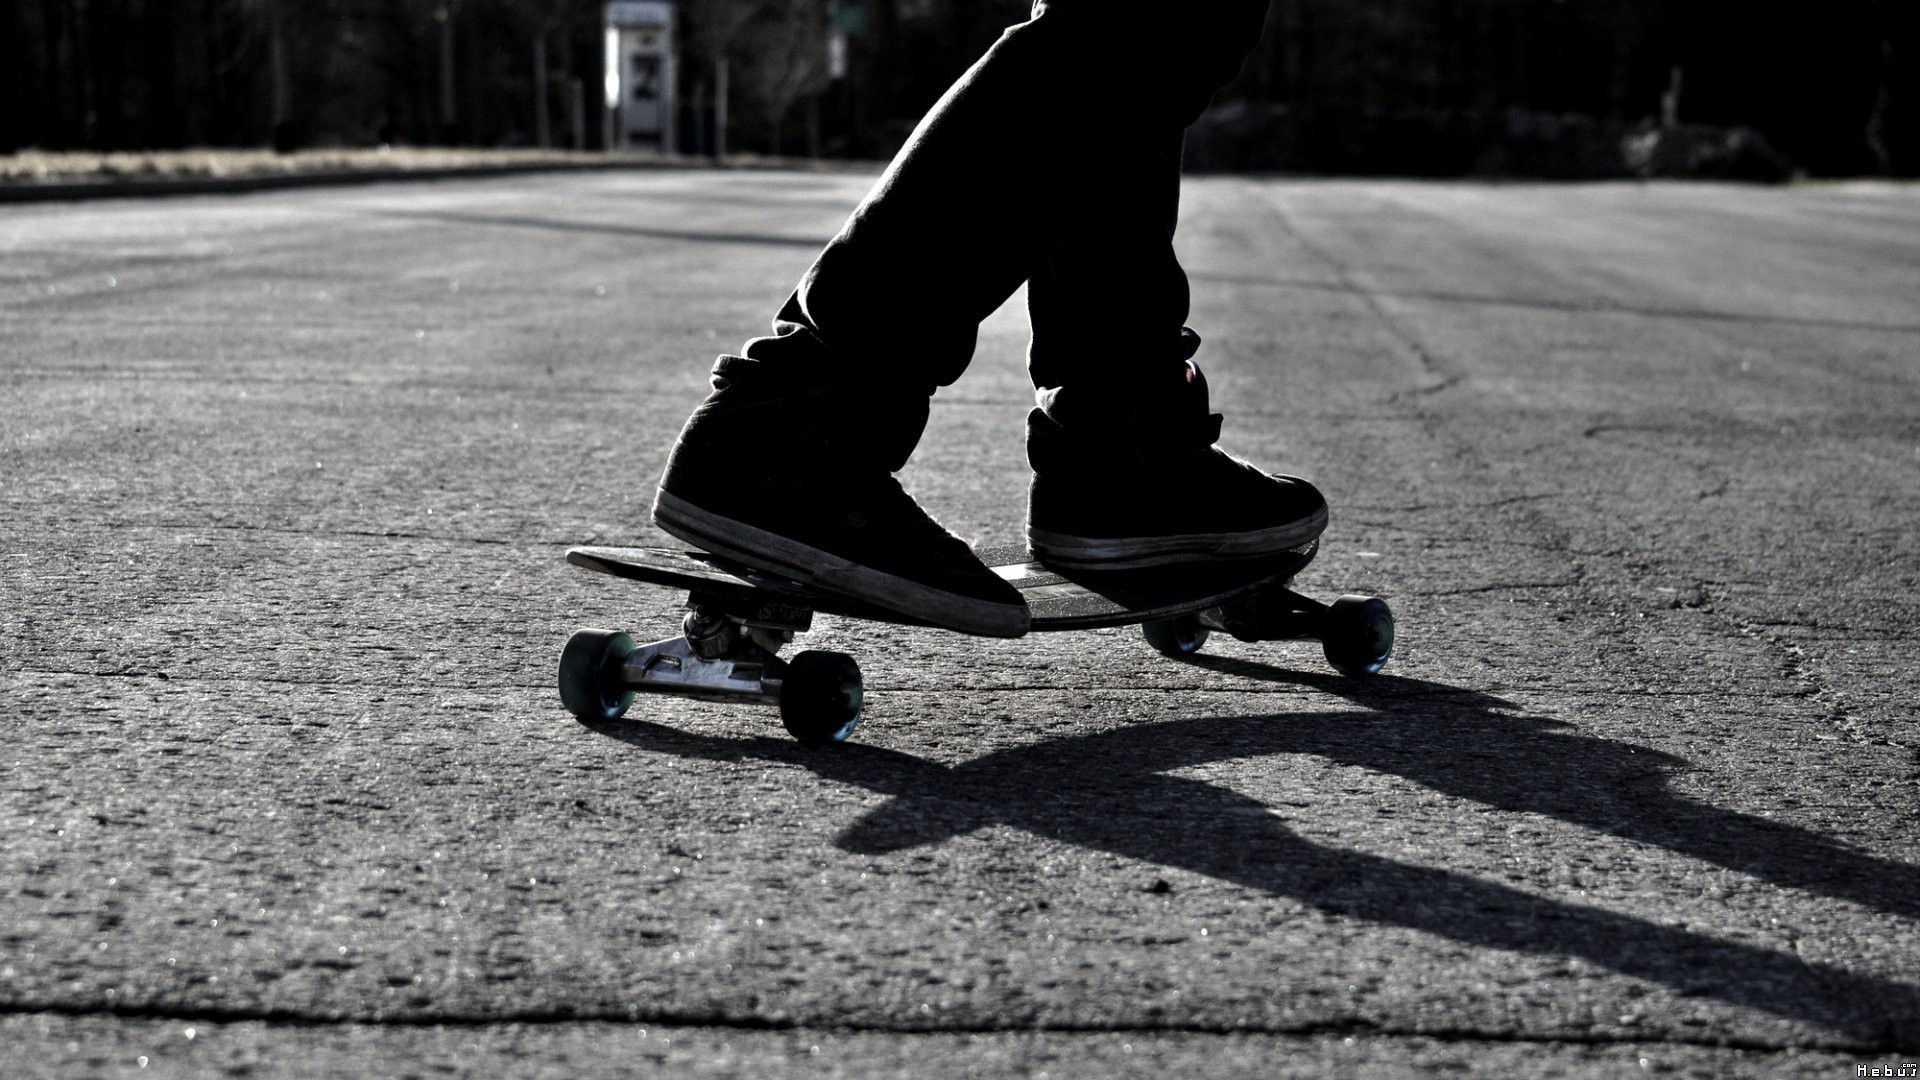 1920x1080 1000+ images about Skate on Pinterest | Parks, Wallpaper